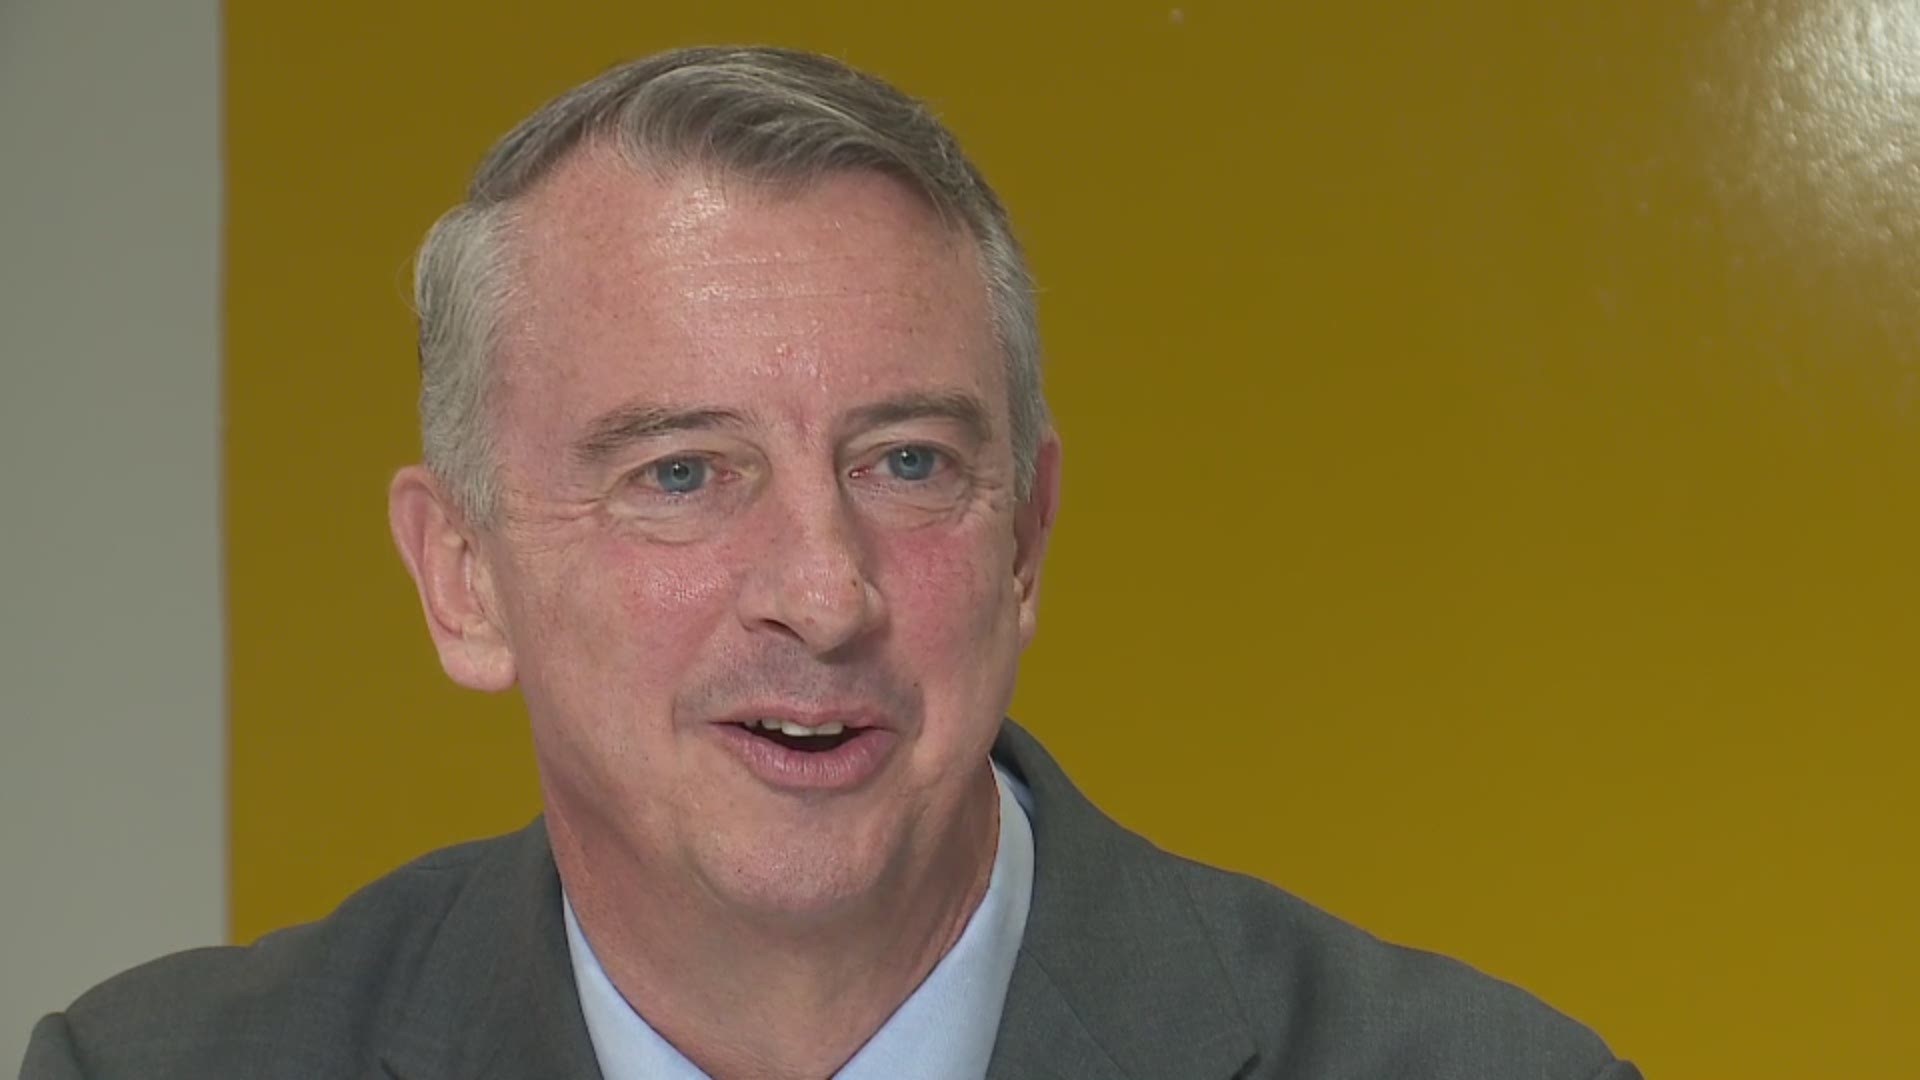 13News Now anchor Janet Roach has a one-on-one interview with Republican candidate for governor, Ed Gillespie.